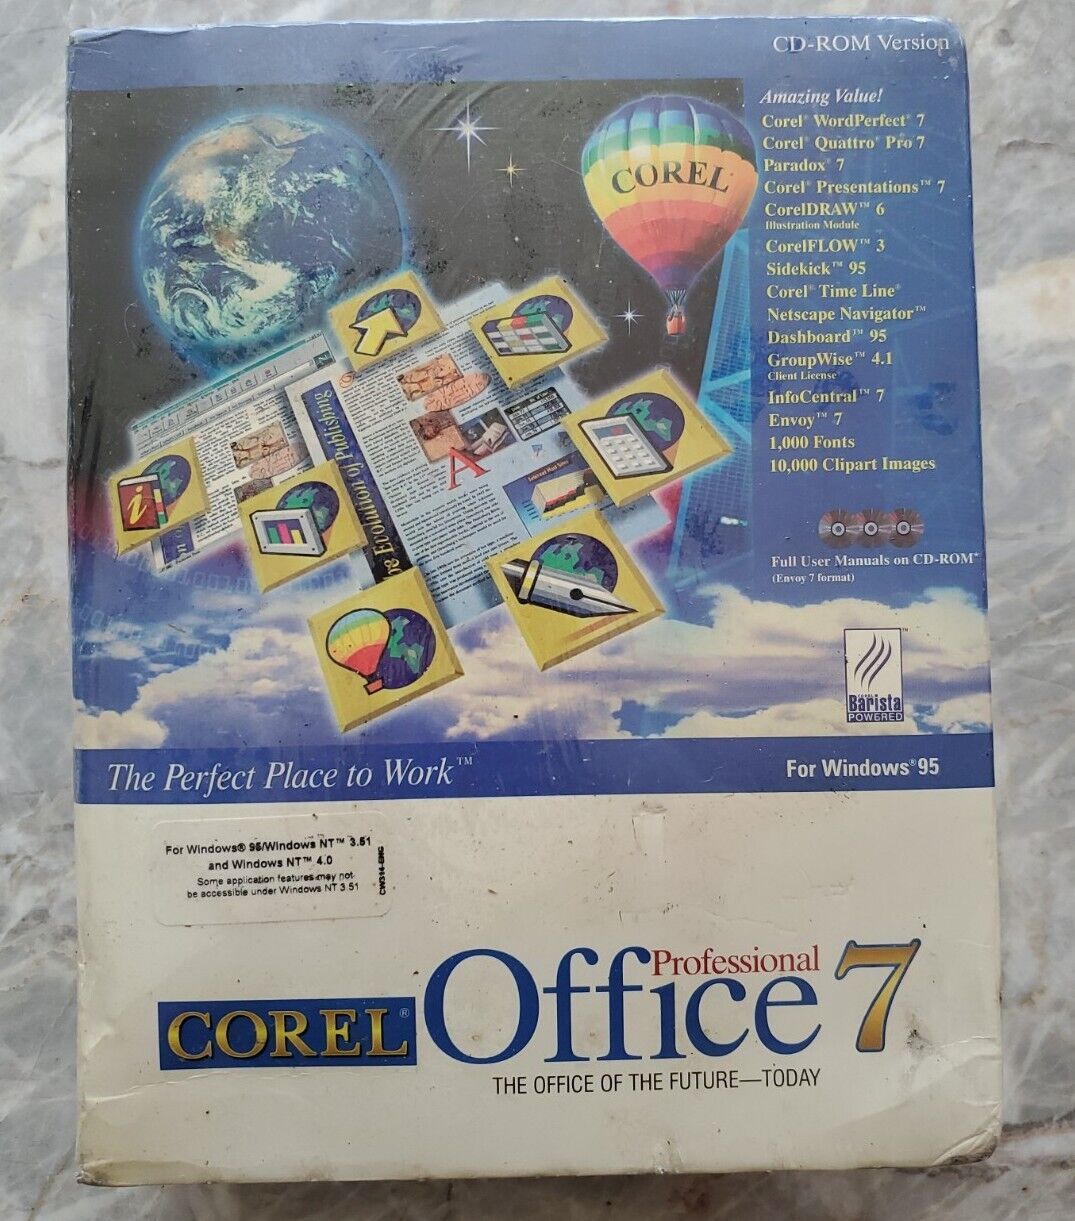 Corel Office 7 Professional PC Program - New and Sealed in Box